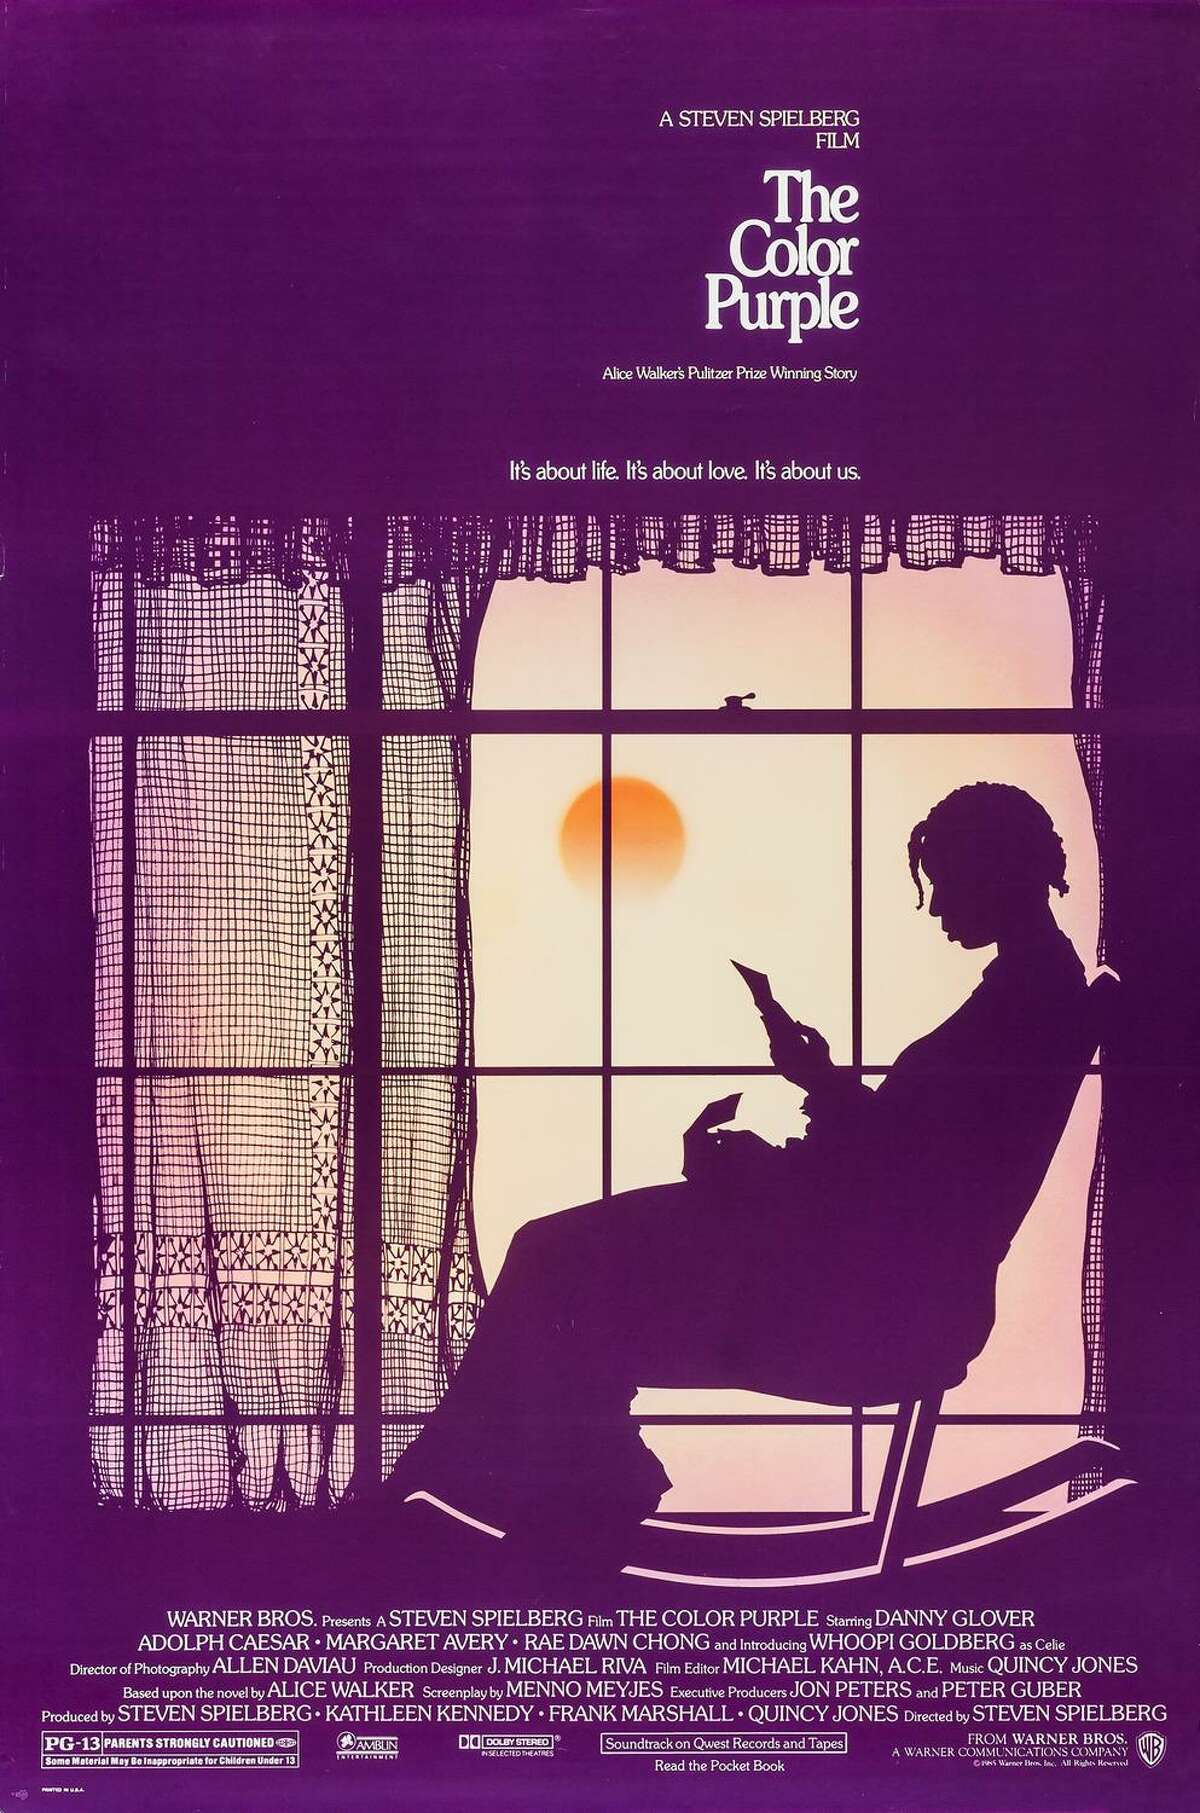 Told delicately but shrewdly by Spielberg, who had never shot anything like this previously in his career, "The Color Purple" is a torturous and painful story that breaks your heart into pieces while simultaneously building up a powerful spirit of hope and love.